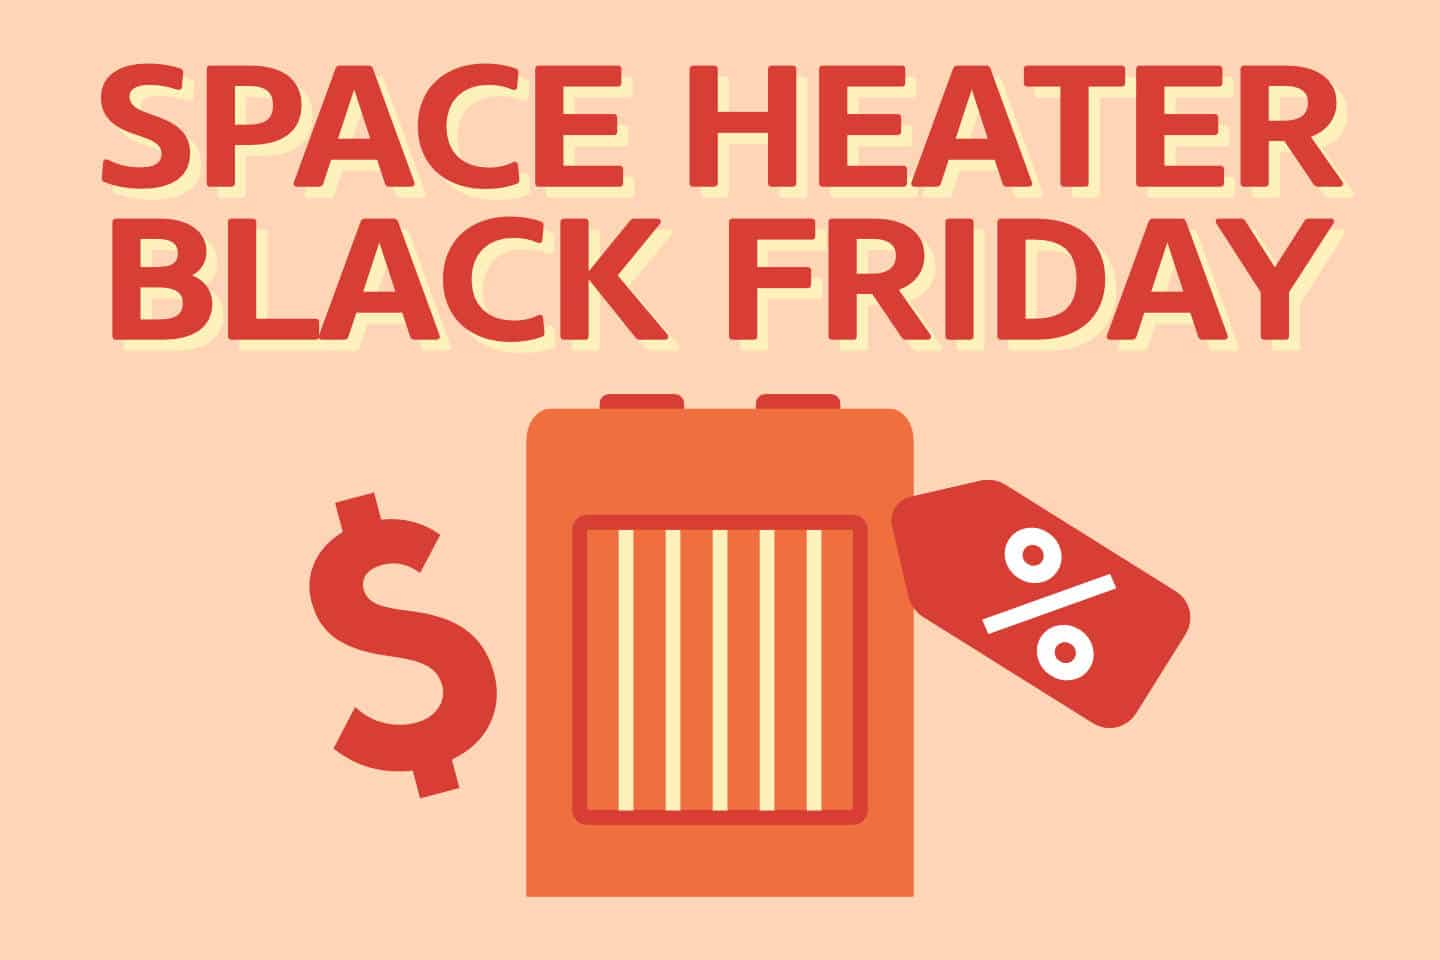 Space Heater Black Friday Deals on Amazon and Walmart (SAVE 70%)